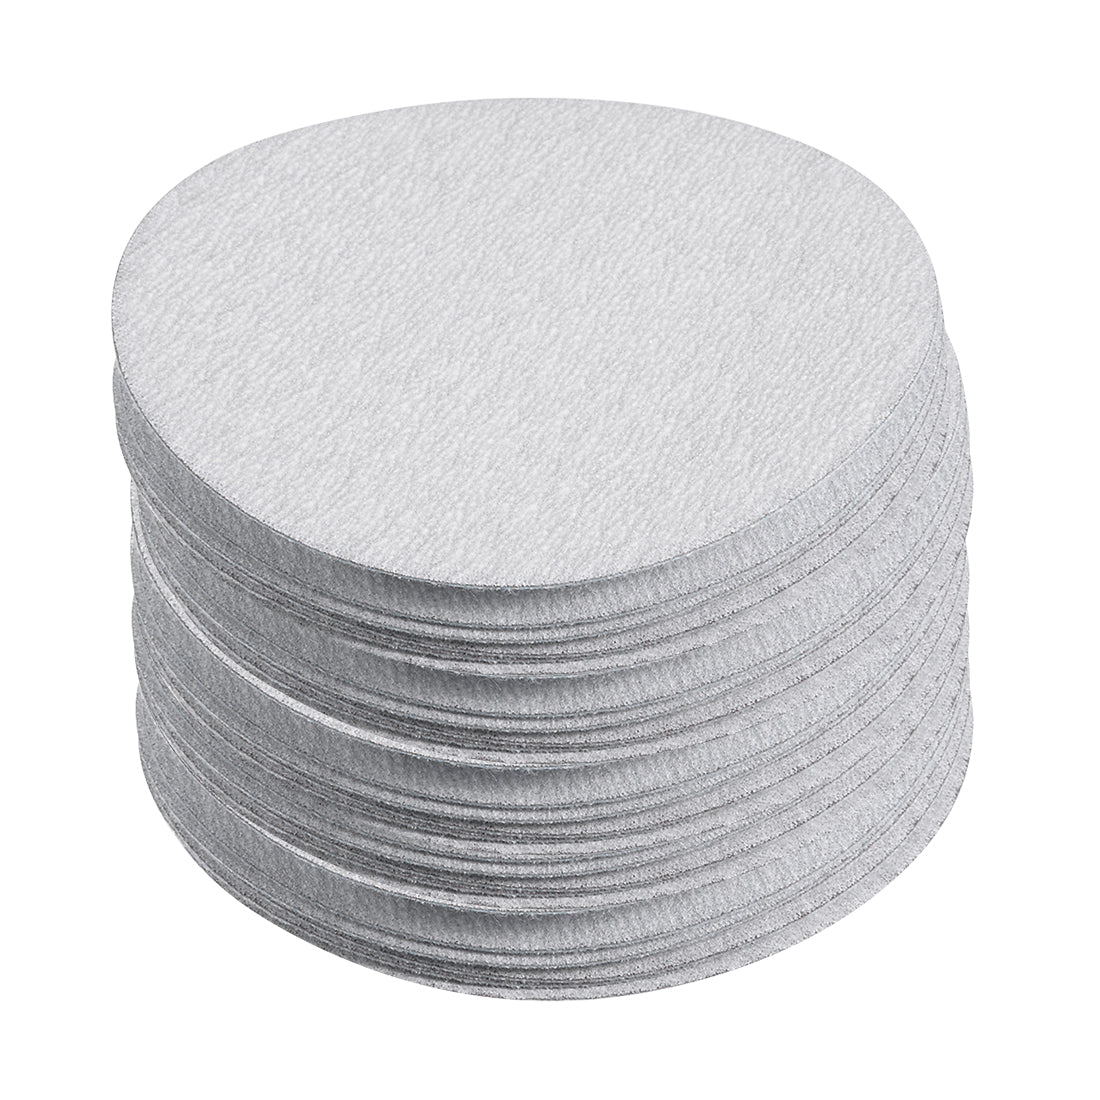 Uxcell Uxcell 50 Pcs 4-Inch Aluminum Oxide White Dry Hook and Loop Sanding Discs Flocking Sandpaper 320 Grit